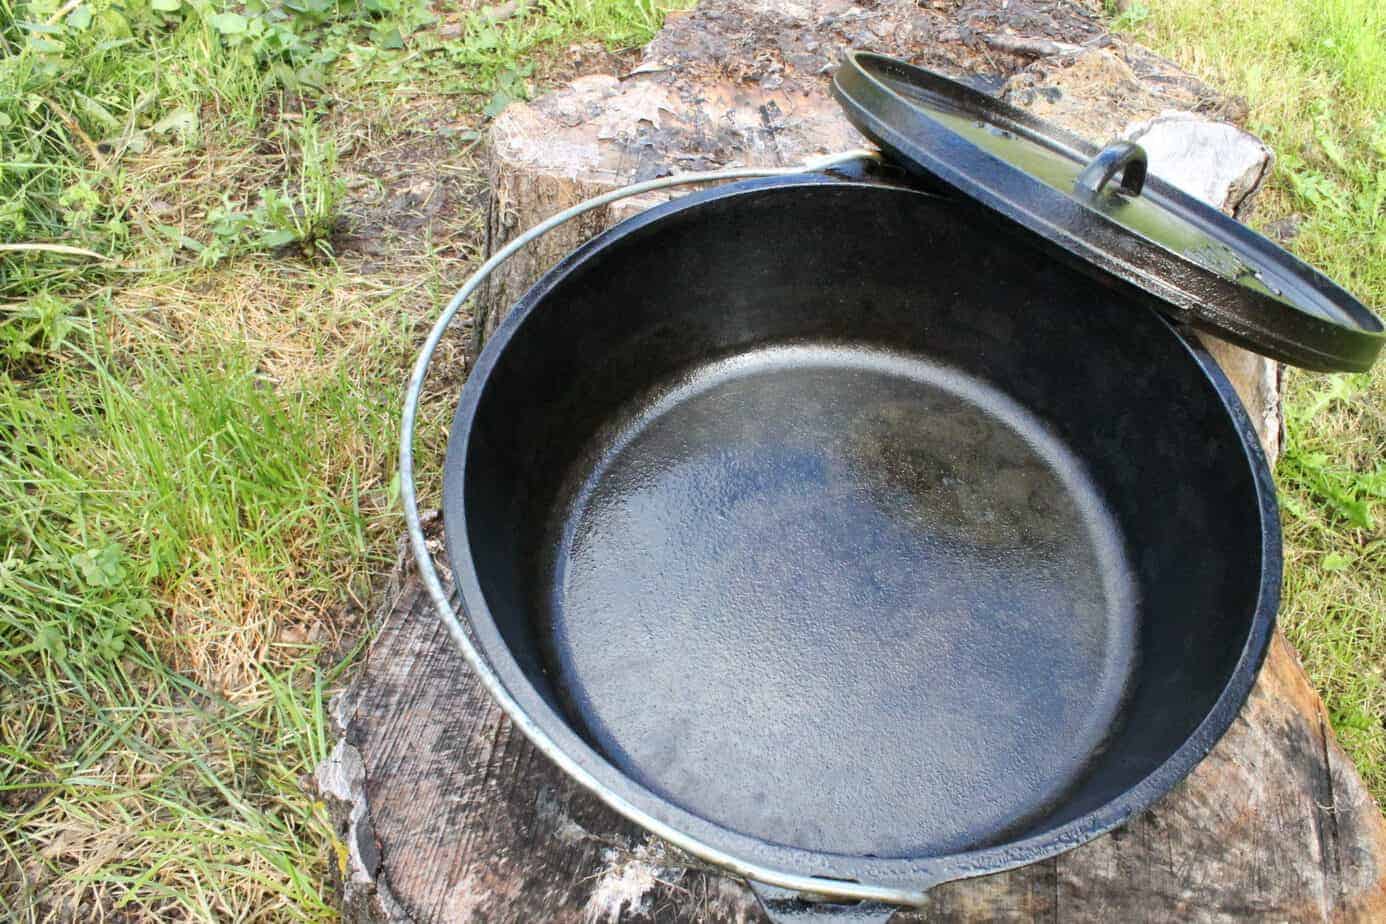 A properly cleaned and seasoned cast iron pot by lodge manufacturing